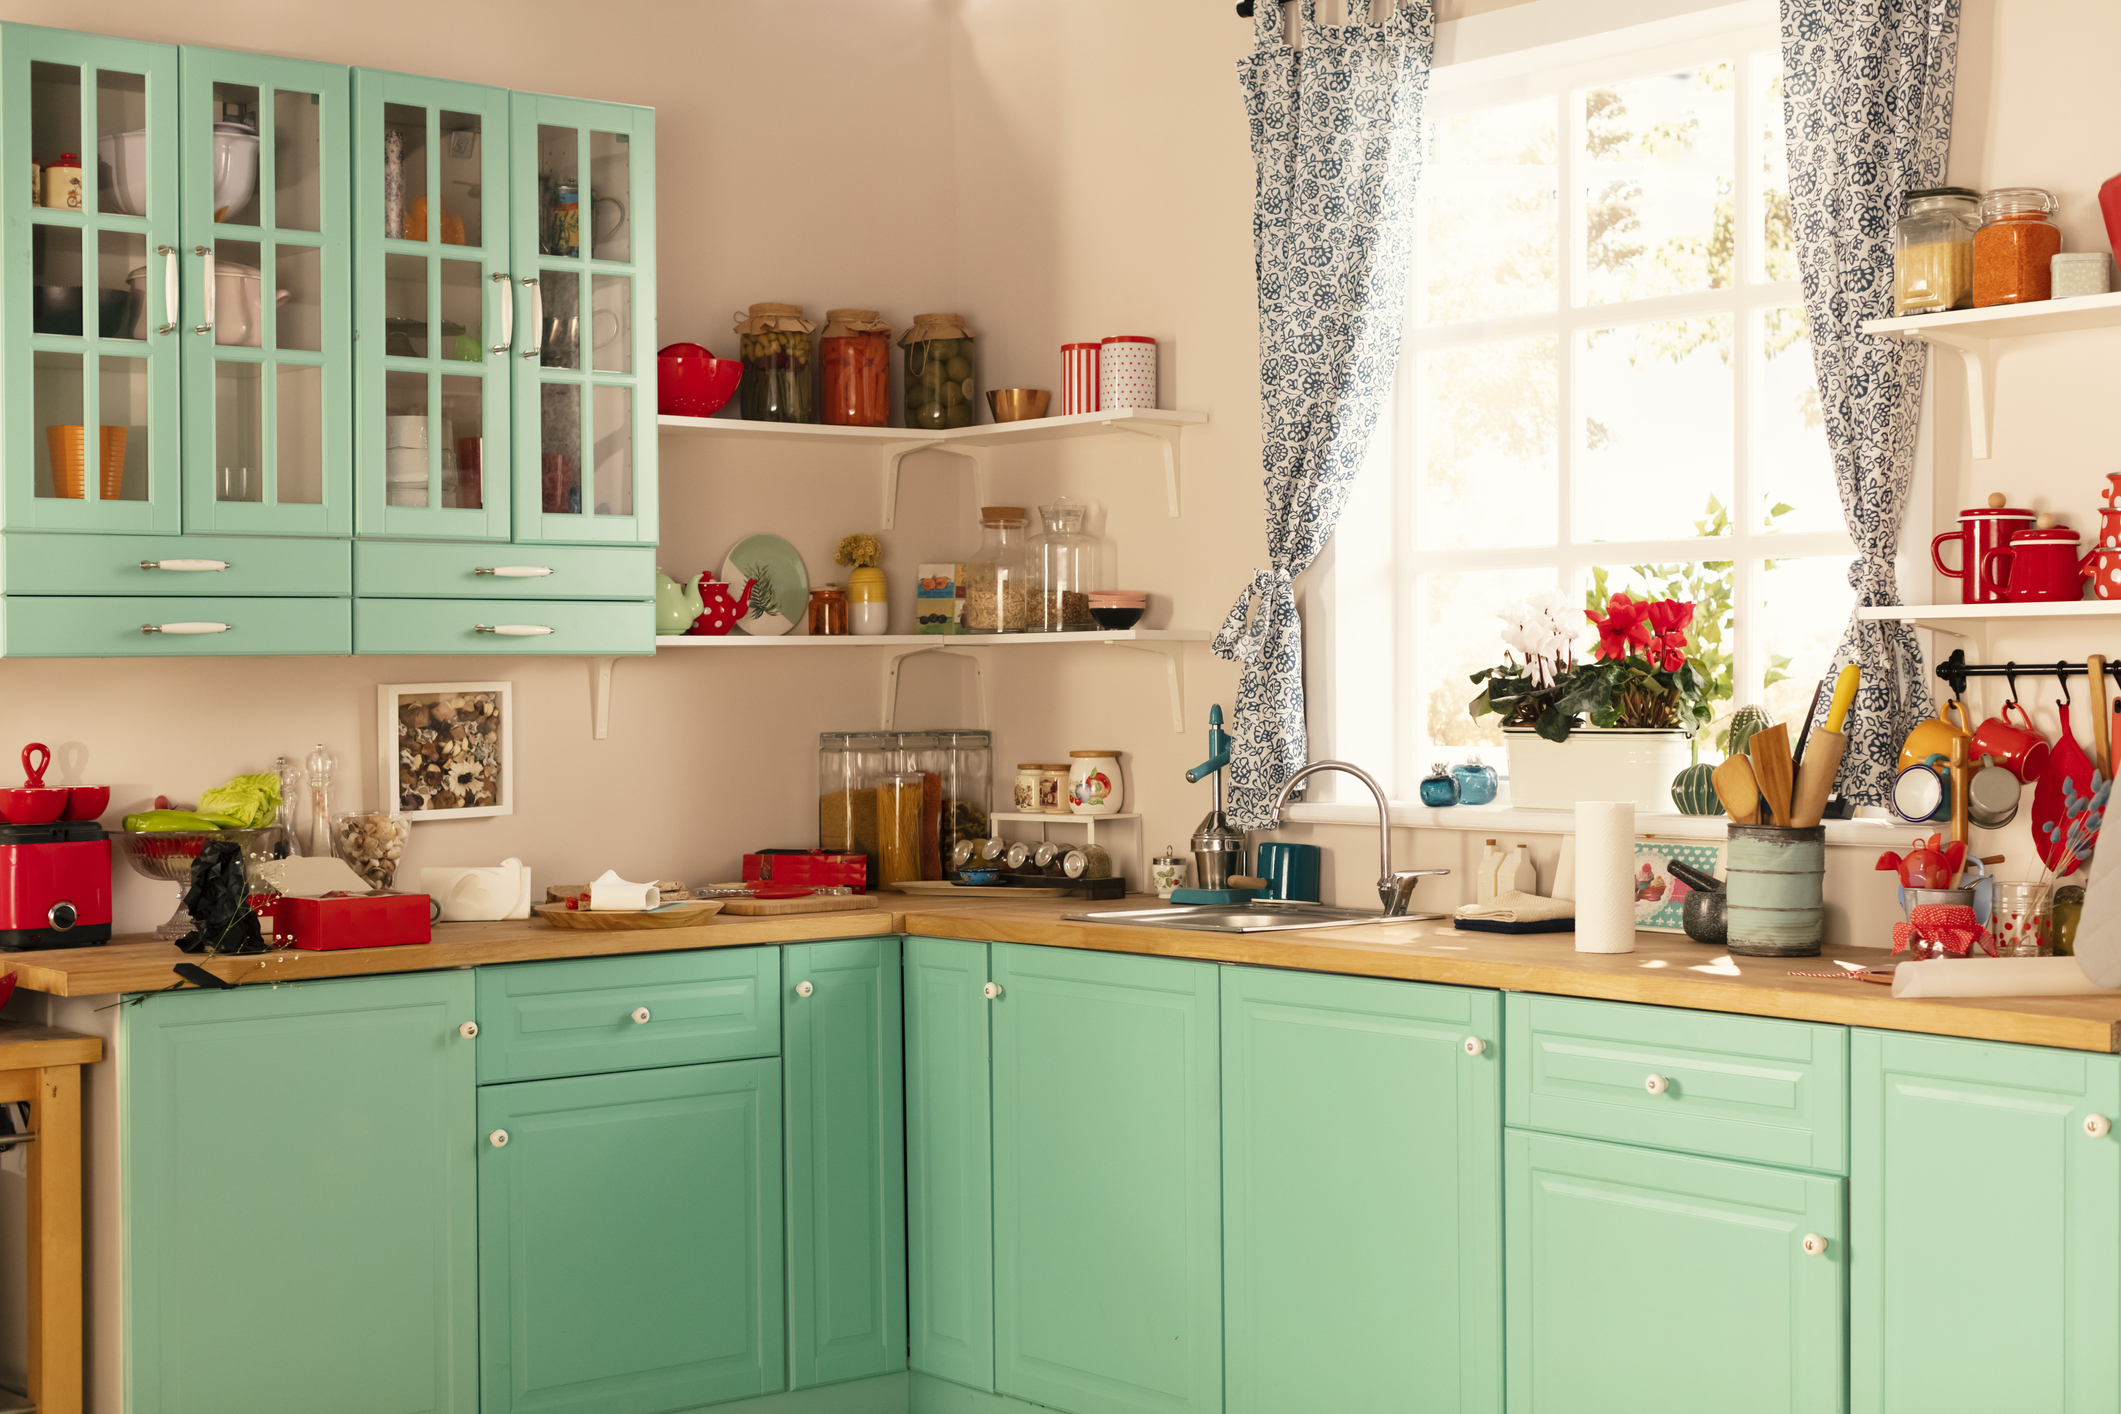 A colorful kitchen with mint green cabinets and red accents.